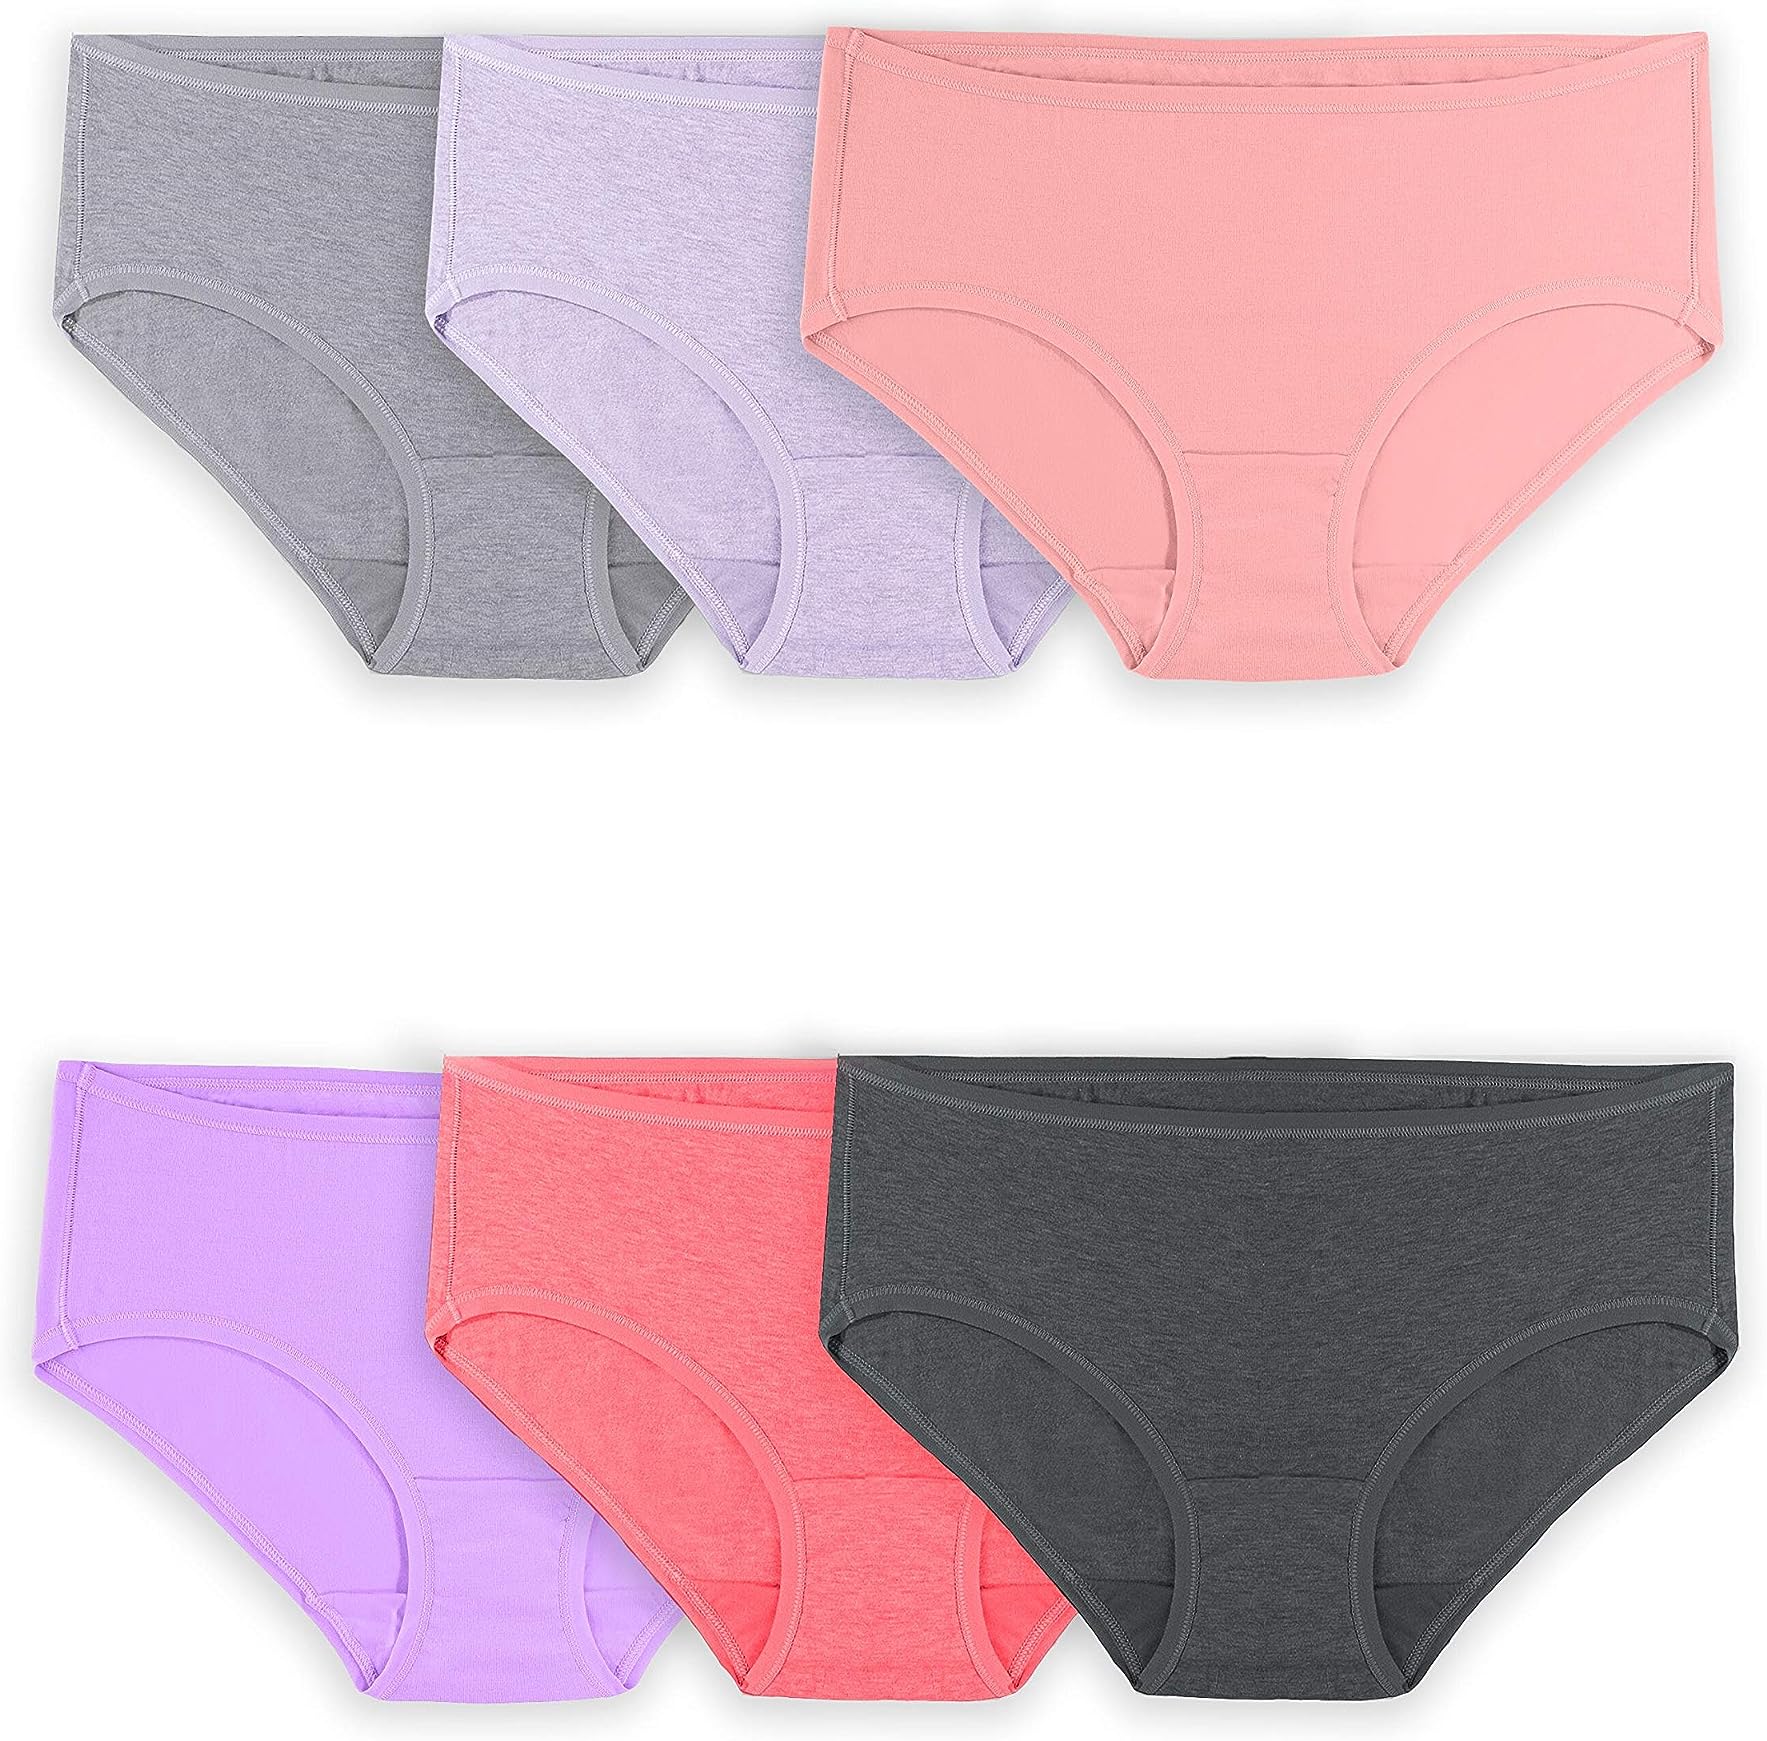 Women's 360 Stretch Comfort Cotton Hipster Panty, Assorted 6 Pack